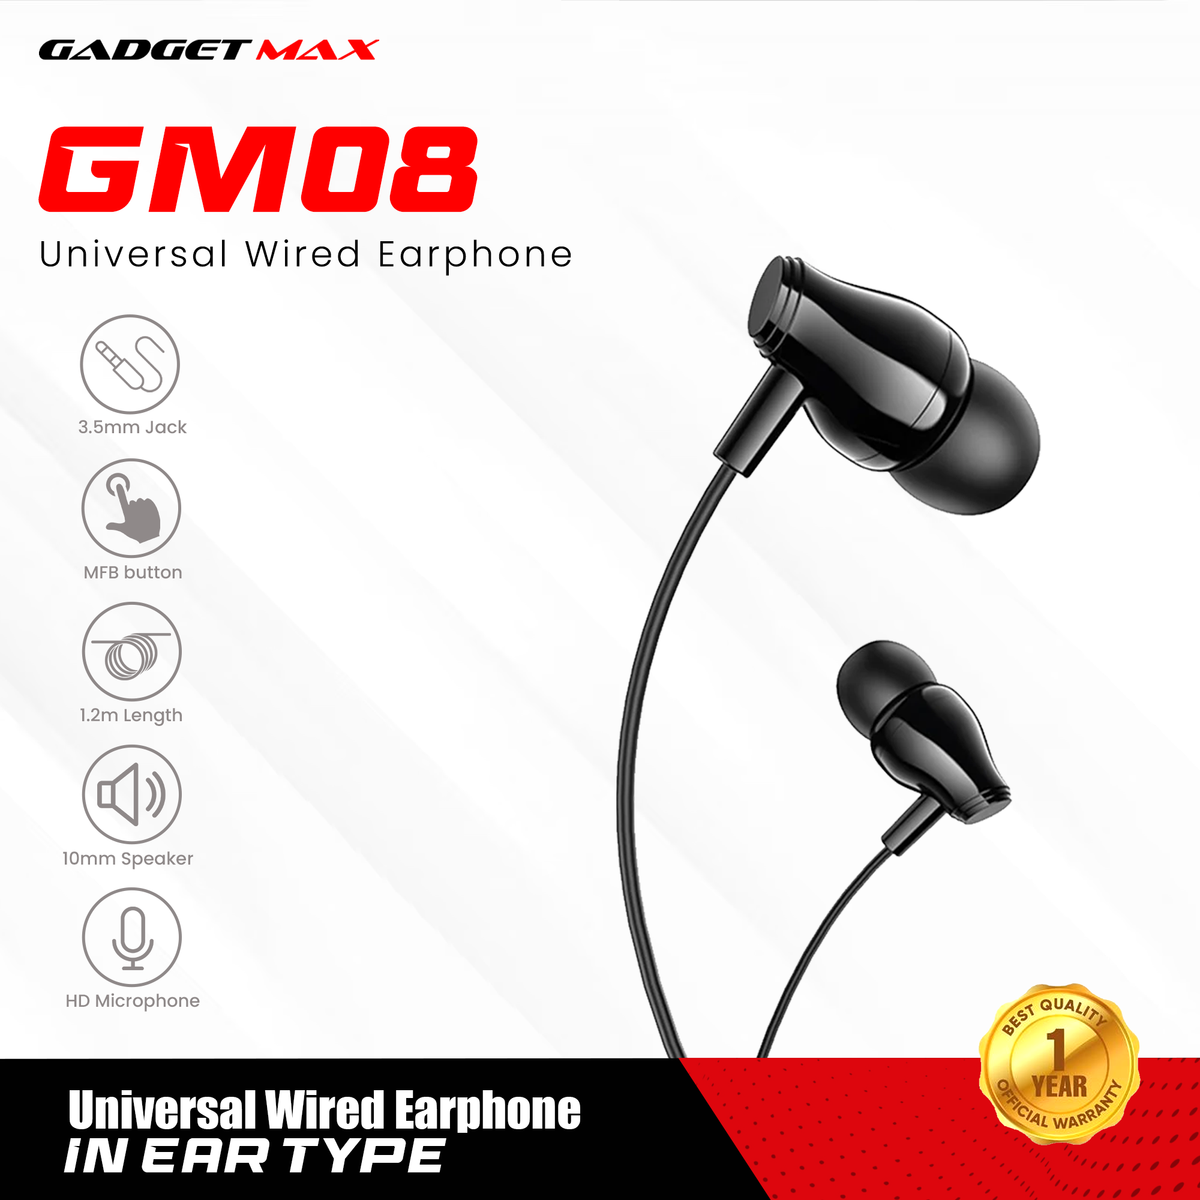 GADGET MAX GM08 UNIVERSAL WIRED 3.5MM EARPHONE WITH MIC (1.2M) - BLACK